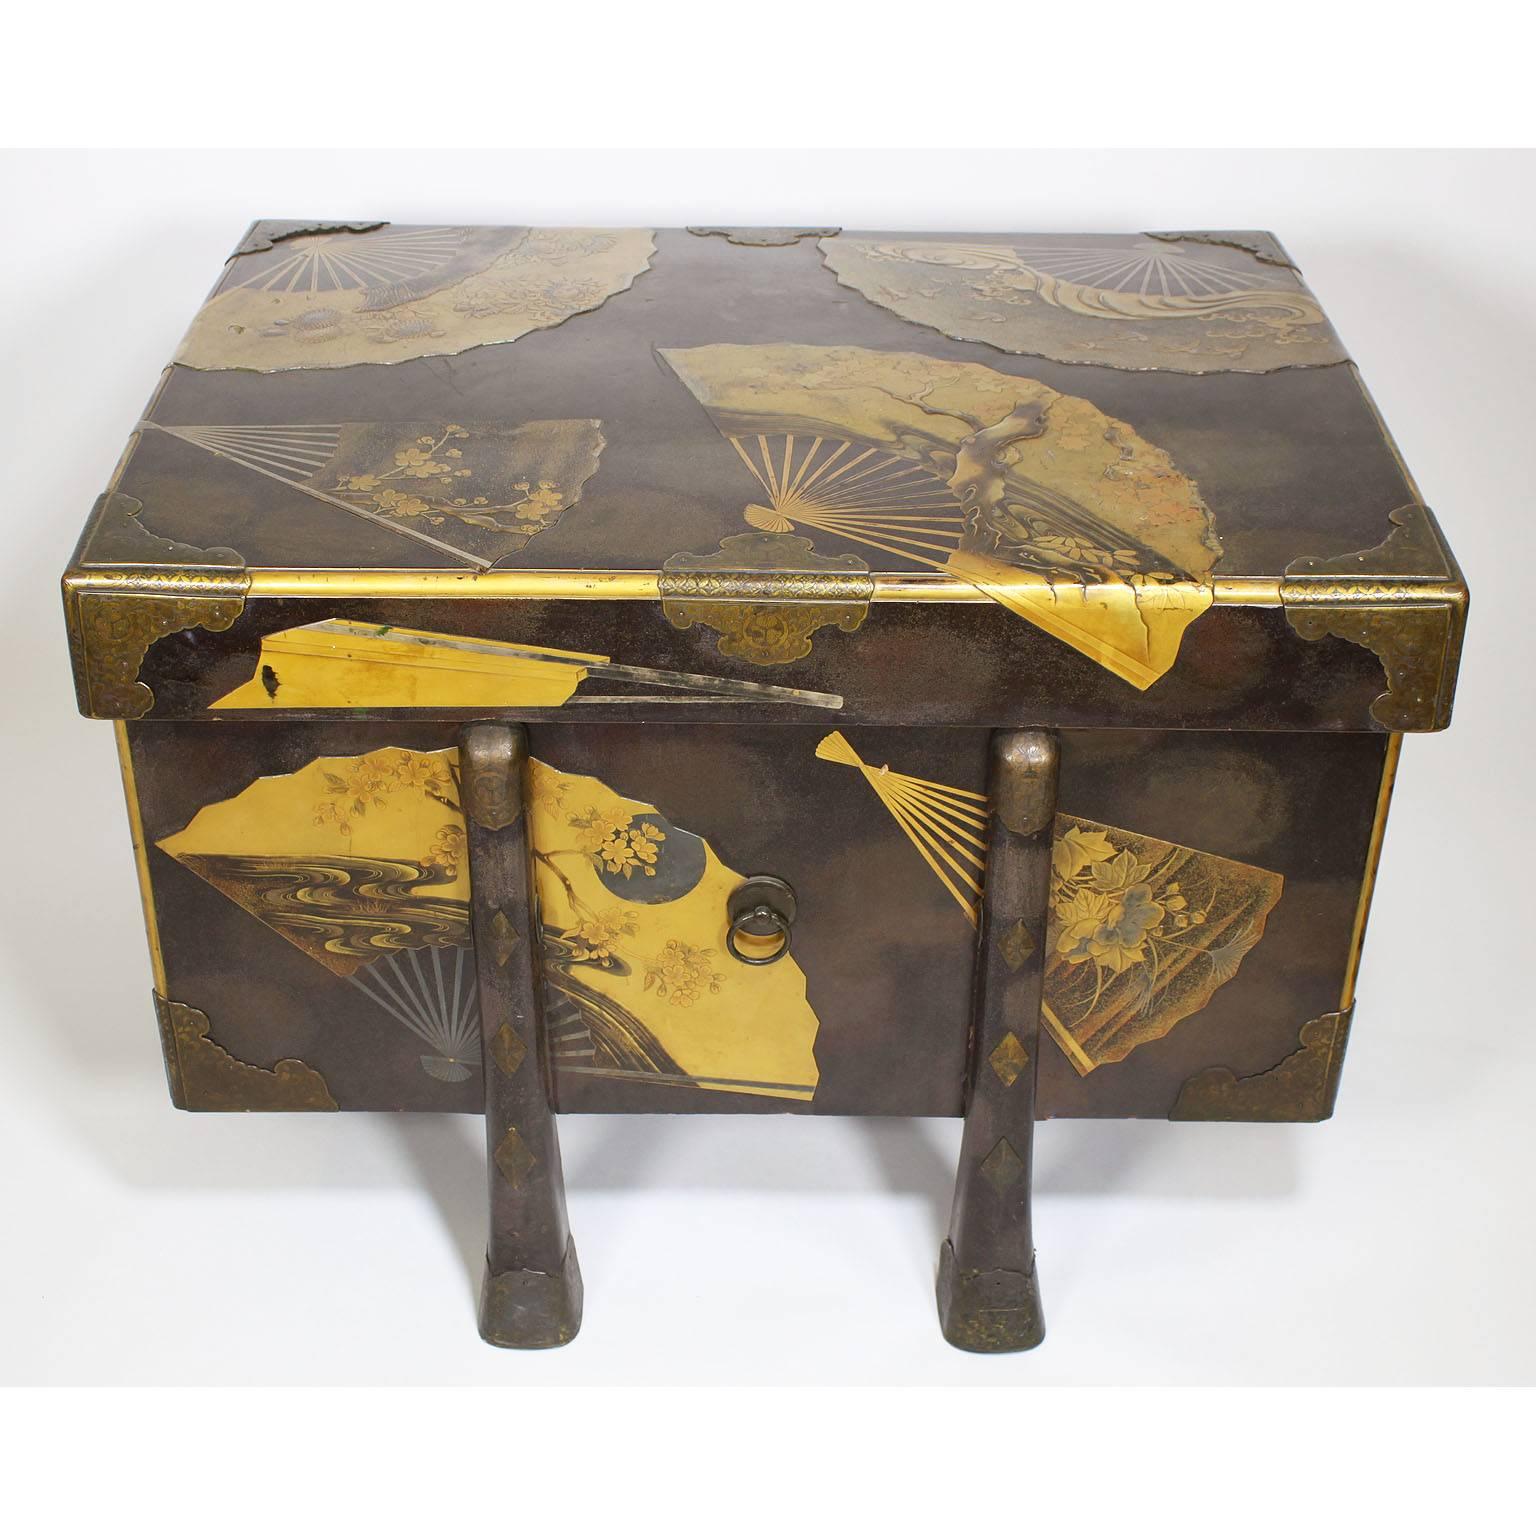 A very fine Japanese Meiji period lacquered karabitsu trunk of square form and raised on six tapering legs. The traveling box is decorated in gold Hiramakie and Nashiji on Roiro ground, with decorations of fans engraved and gilt Kanagu, circa